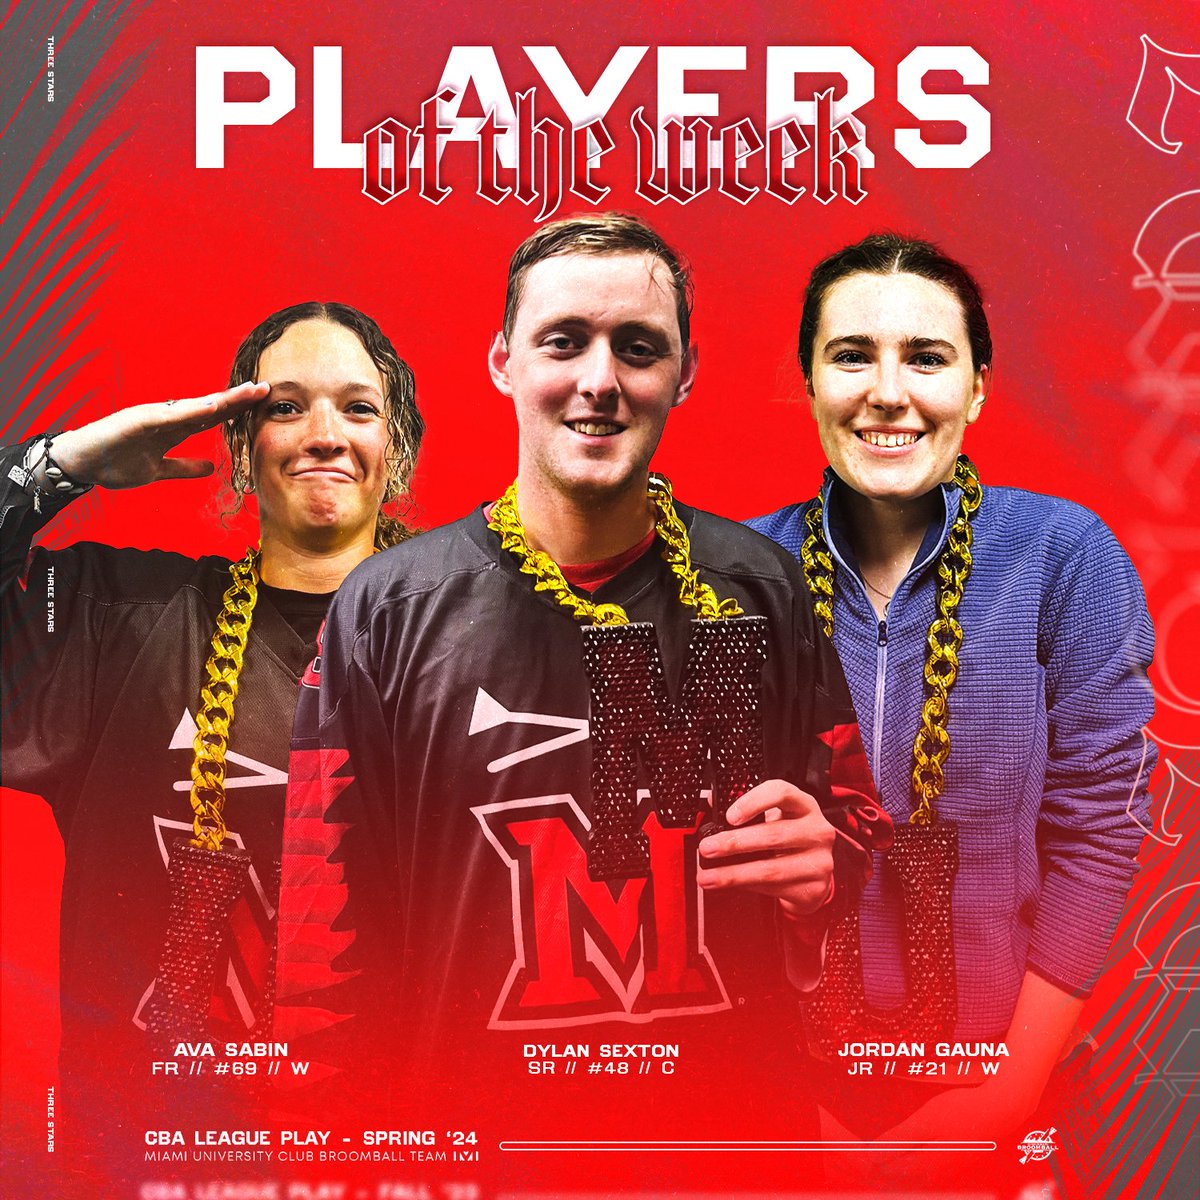 Your players of the week from the past two weeks... Ava Sabin, Dylan Sexton (x2), and Jordan Gauna!!

#MiamiOH #LoveandHonor